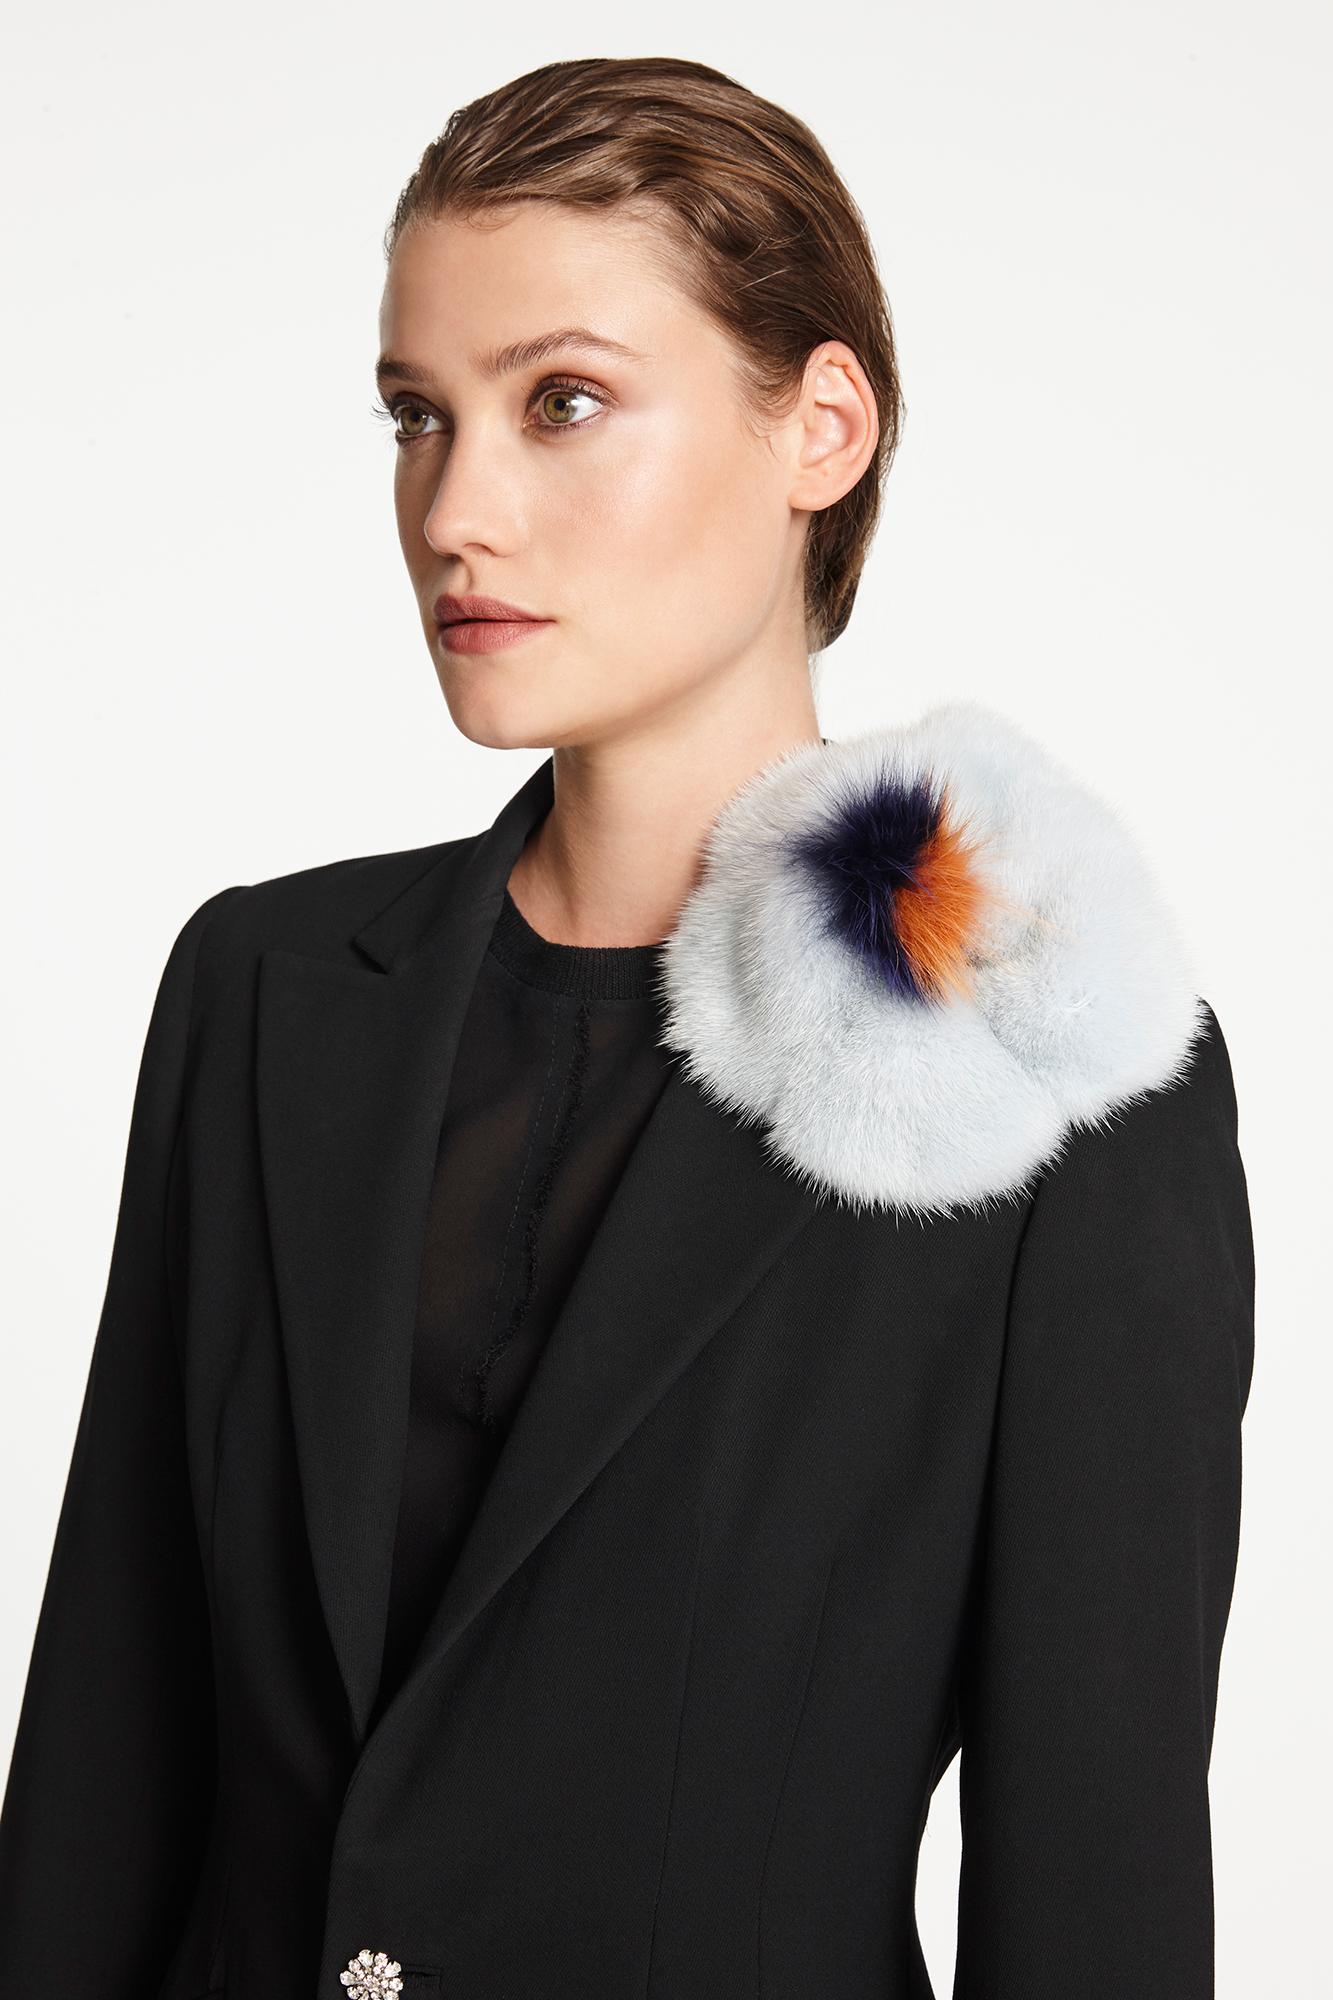 The perfect gift, this Verheyen London mink fur flower brooch is designed to add a glimmer of warmth and fun to your look.  Wear on your favourite winter knit or over a cape for glamour.

PRODUCT DETAILS

Colour: Iced Topaz
Material: Dyed Mink & Fox